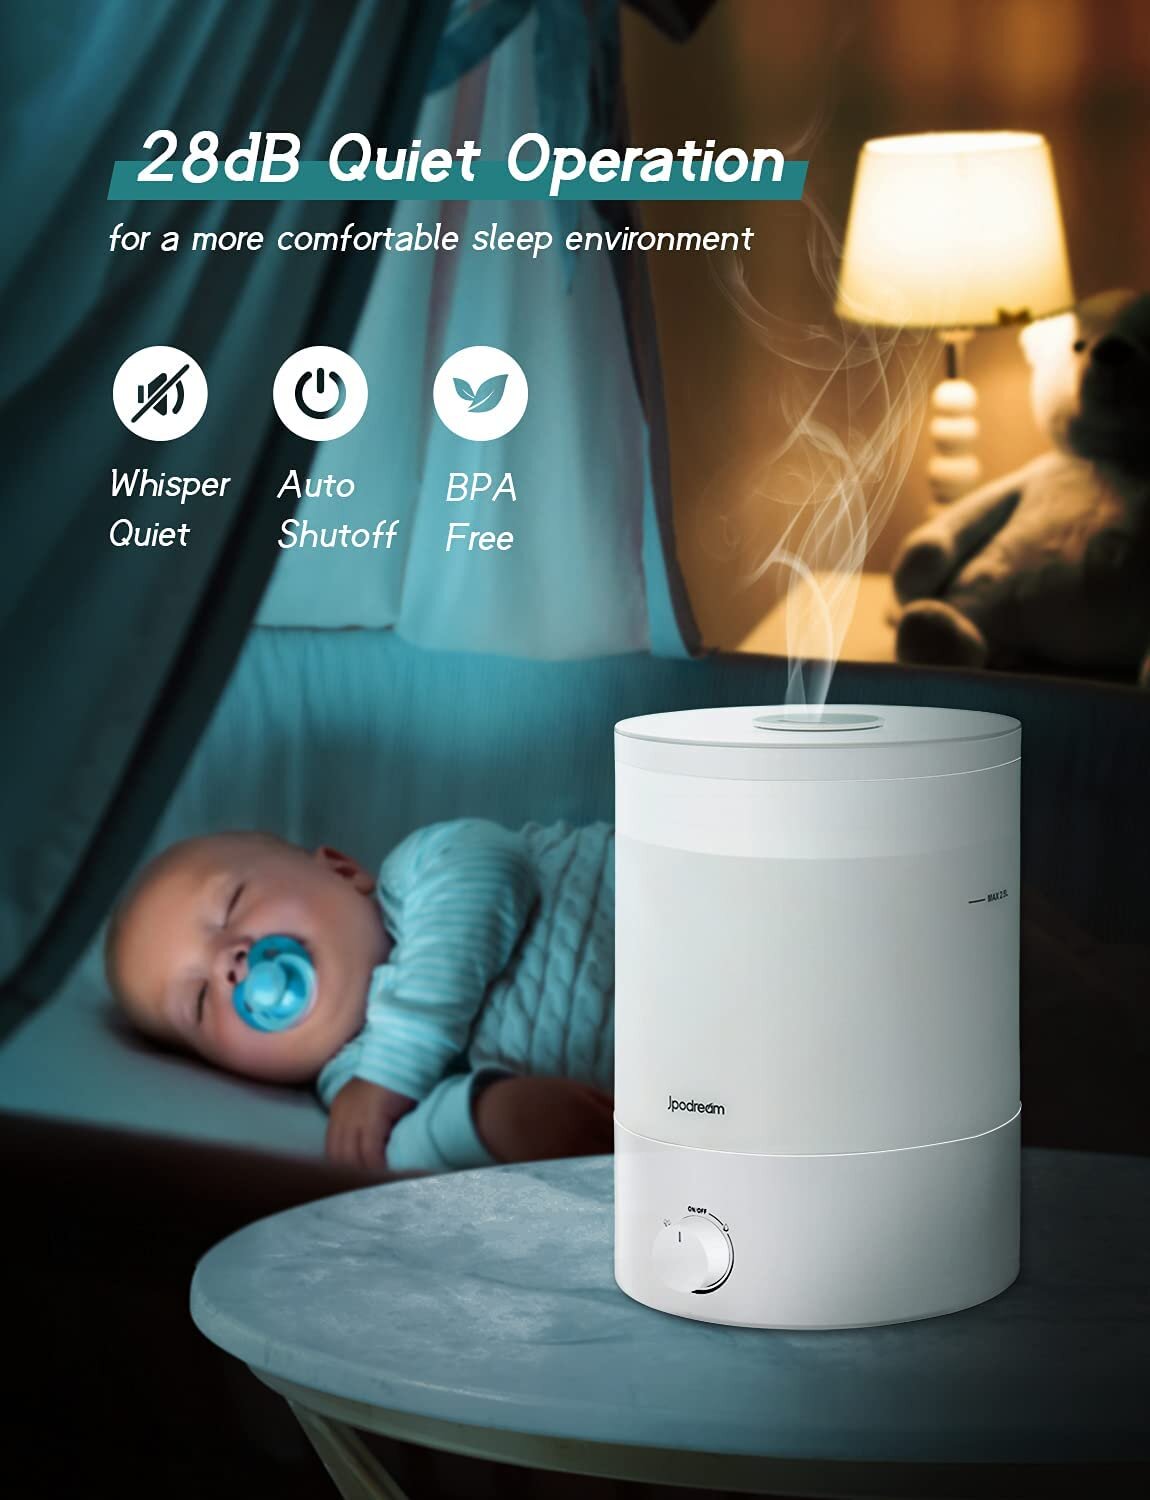 Ultrasonic Air Humidifier with Essential Oil Diffuser 28dB Whisper Quiet Adjustable Mist Auto Shut Off 12-30H Run Time Humidifiers for Bedroom Large Room 2.5L Top Fill Cool Mist Humidifiers for Home Kids Baby Nursery with Night Light